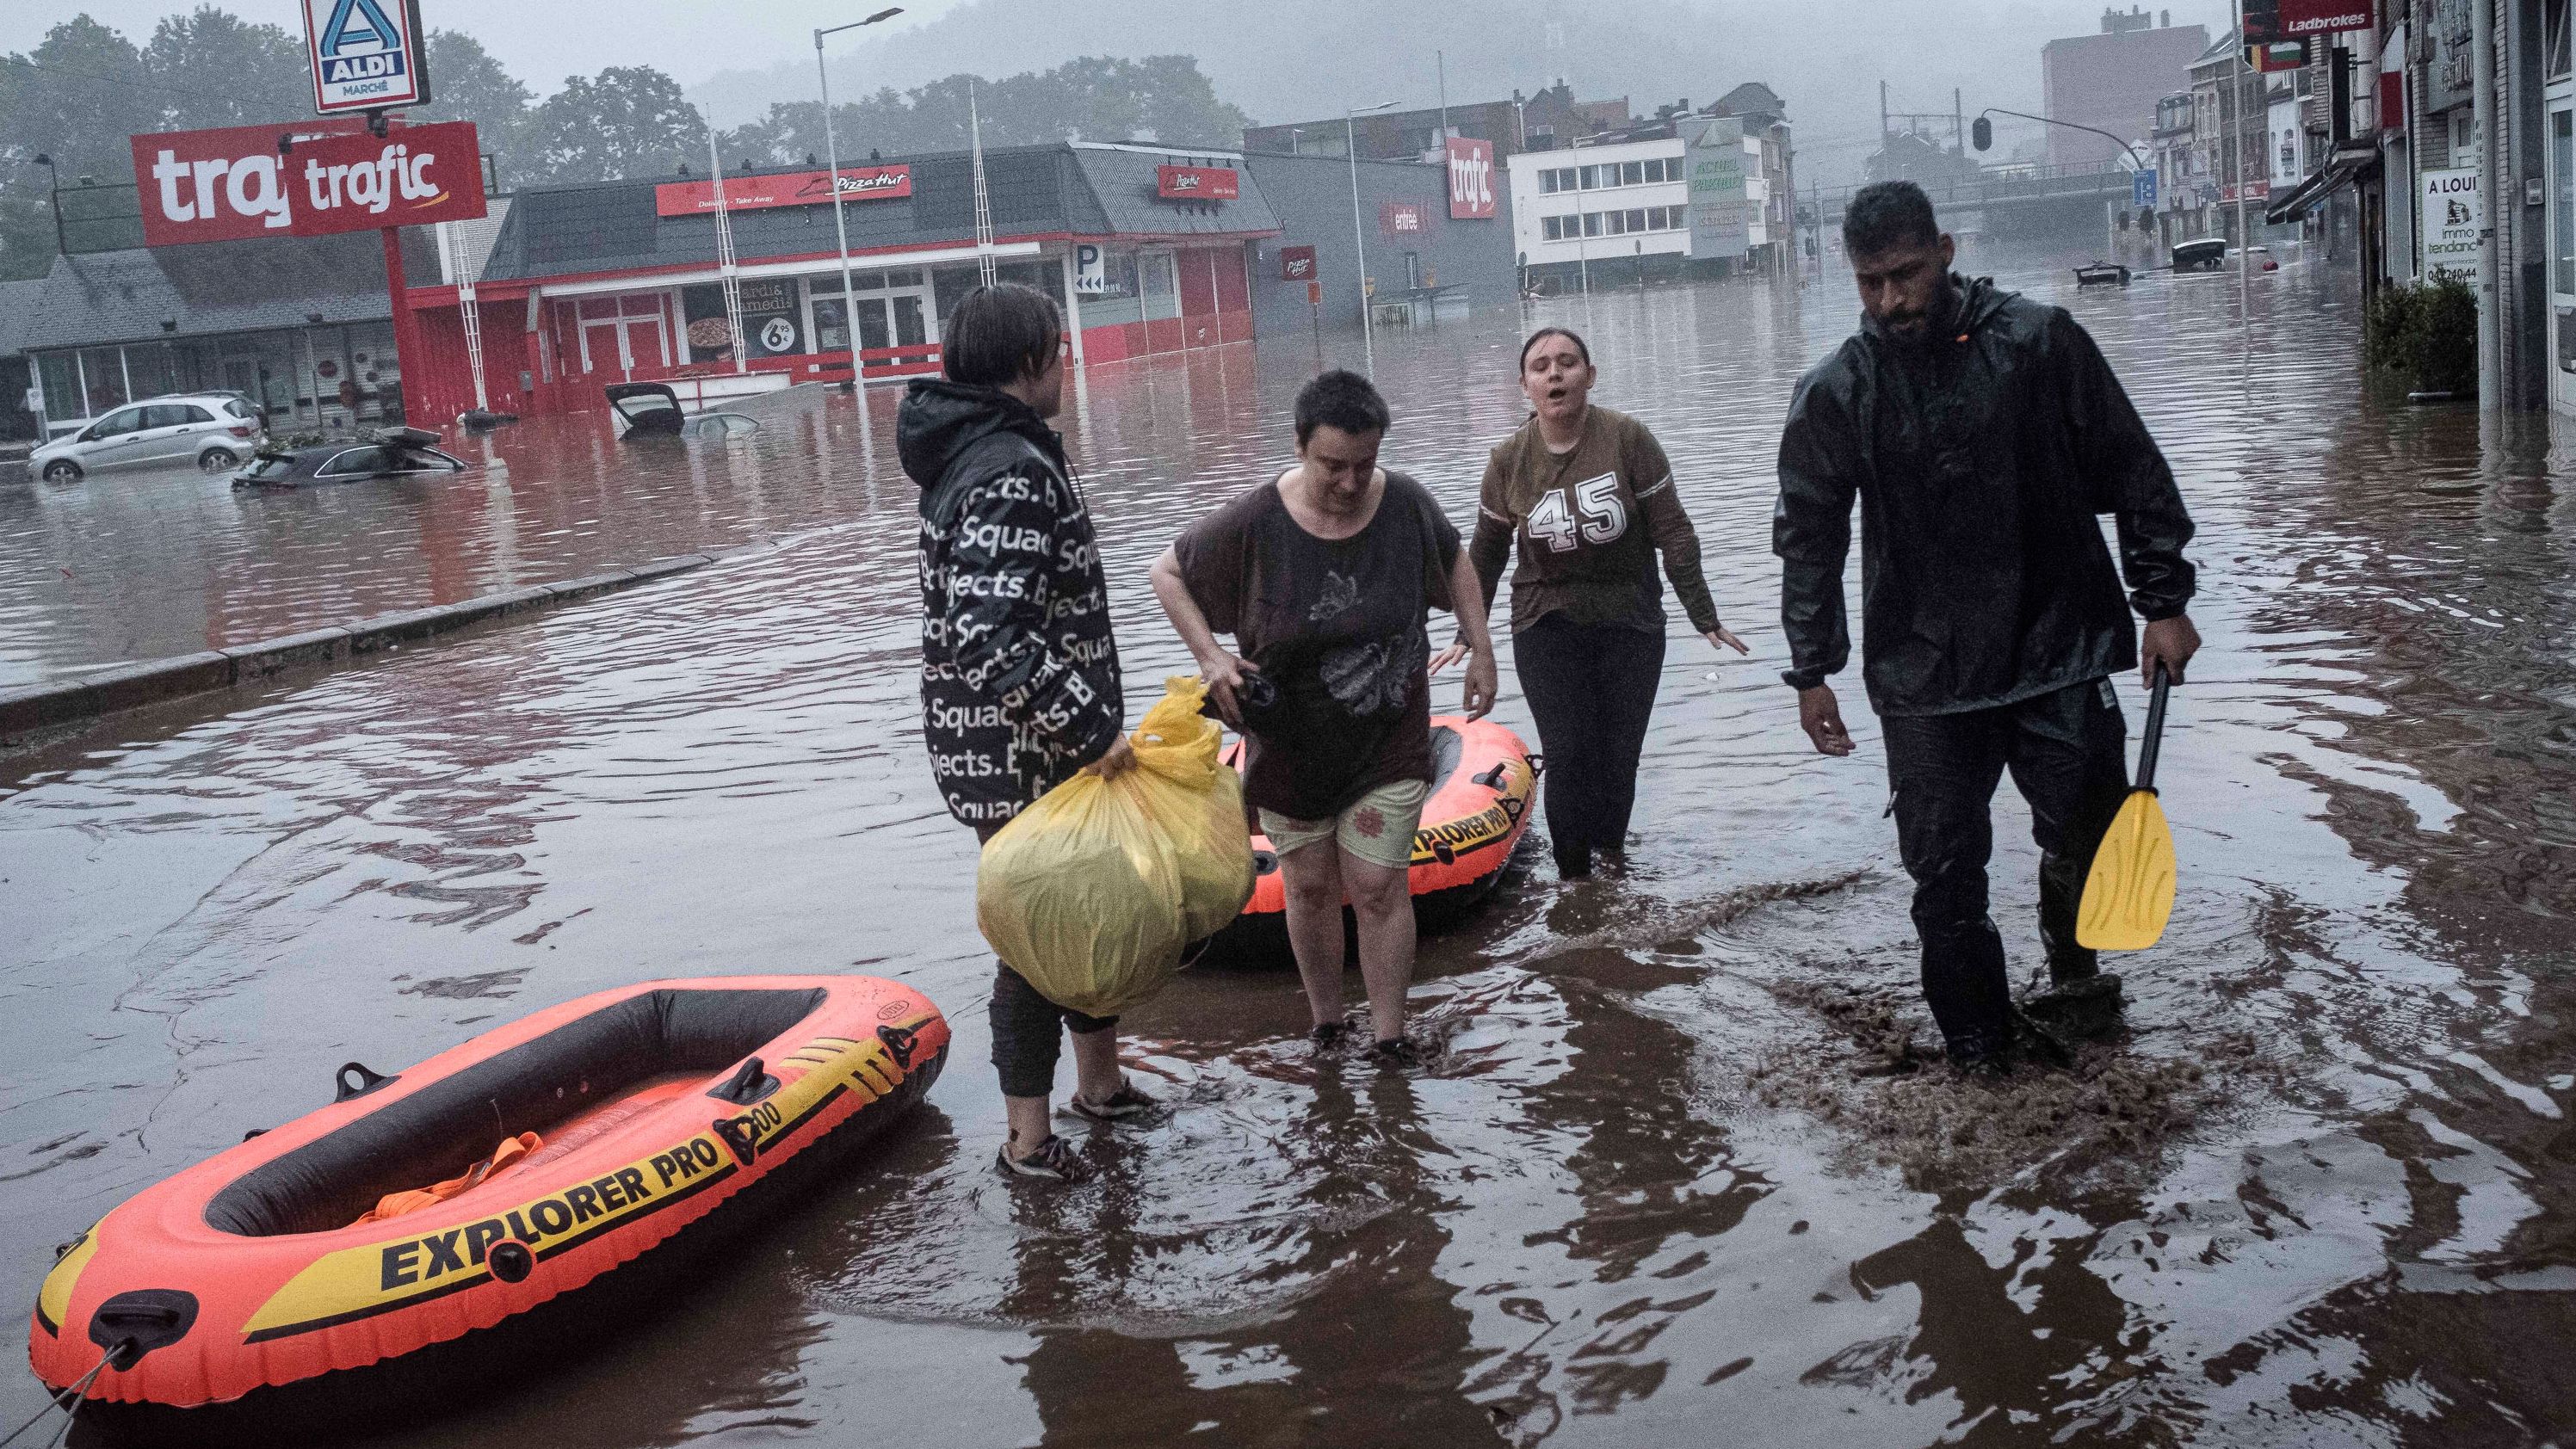 People use rafts to evacuate after the Meuse River broke its banks during heavy flooding in Liege, Belgium.